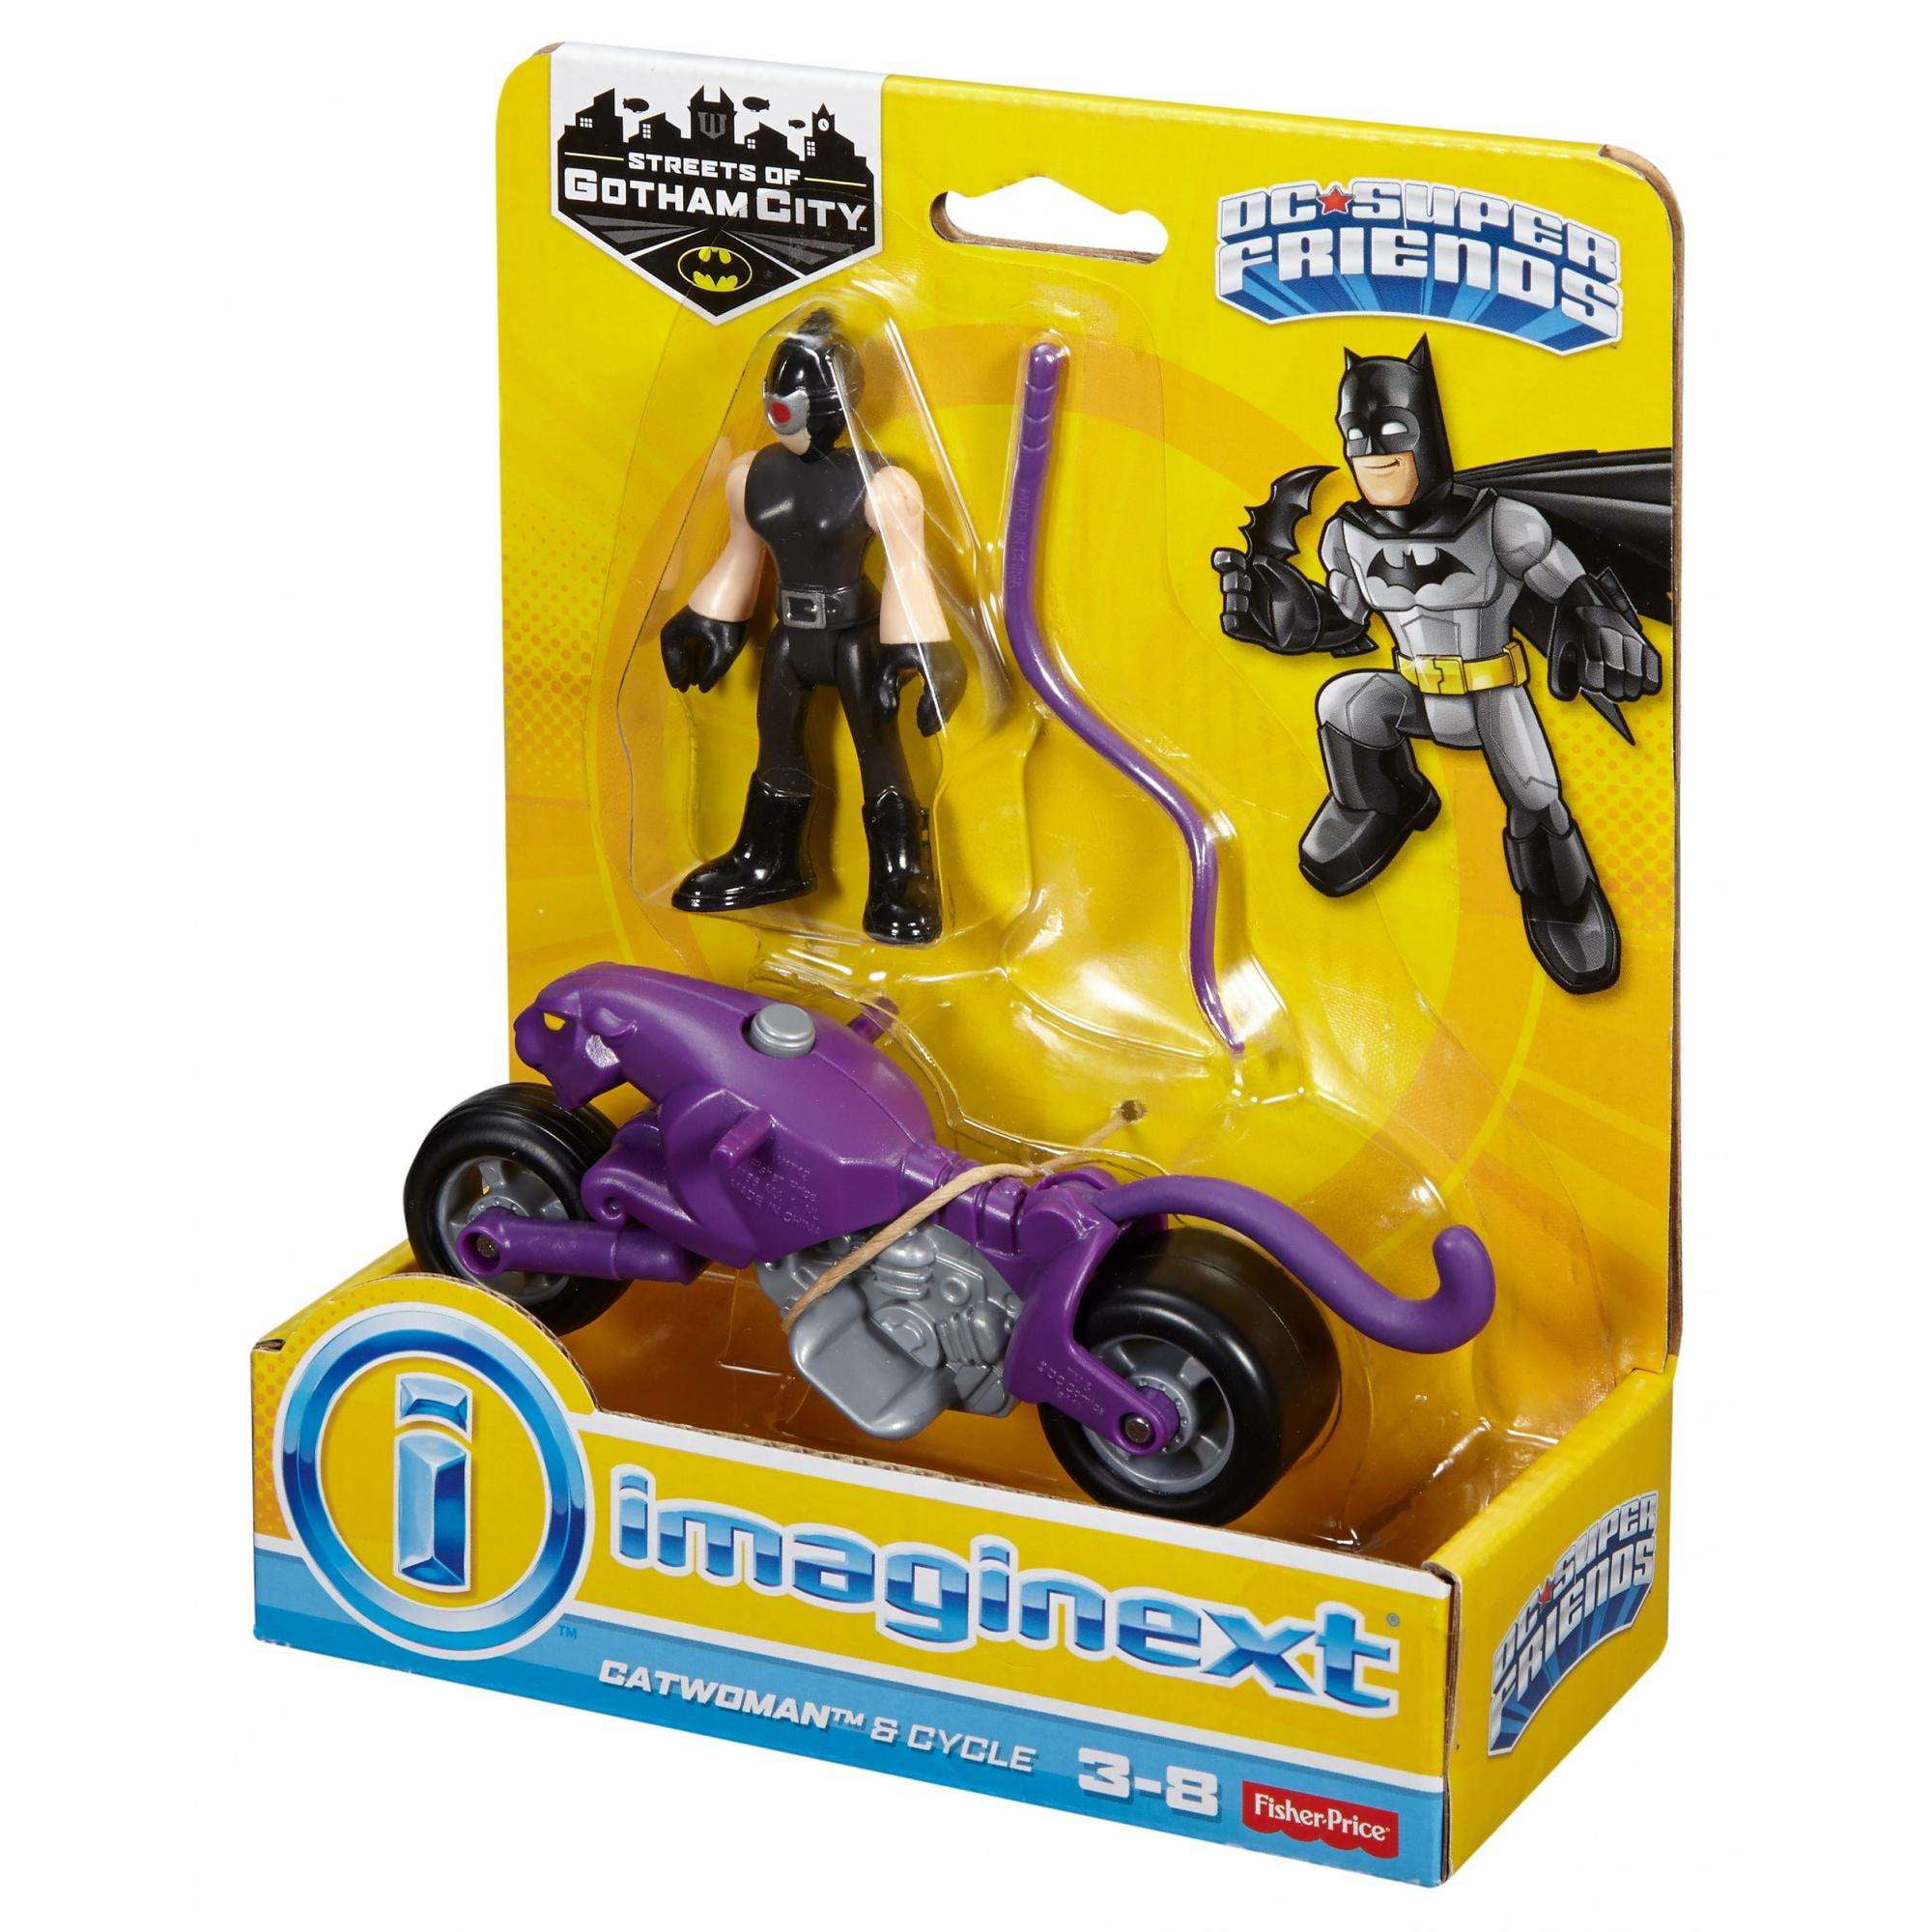 Catwoman & Cycle Brand New Fisher Price Imaginext DC Streets of Gotham 